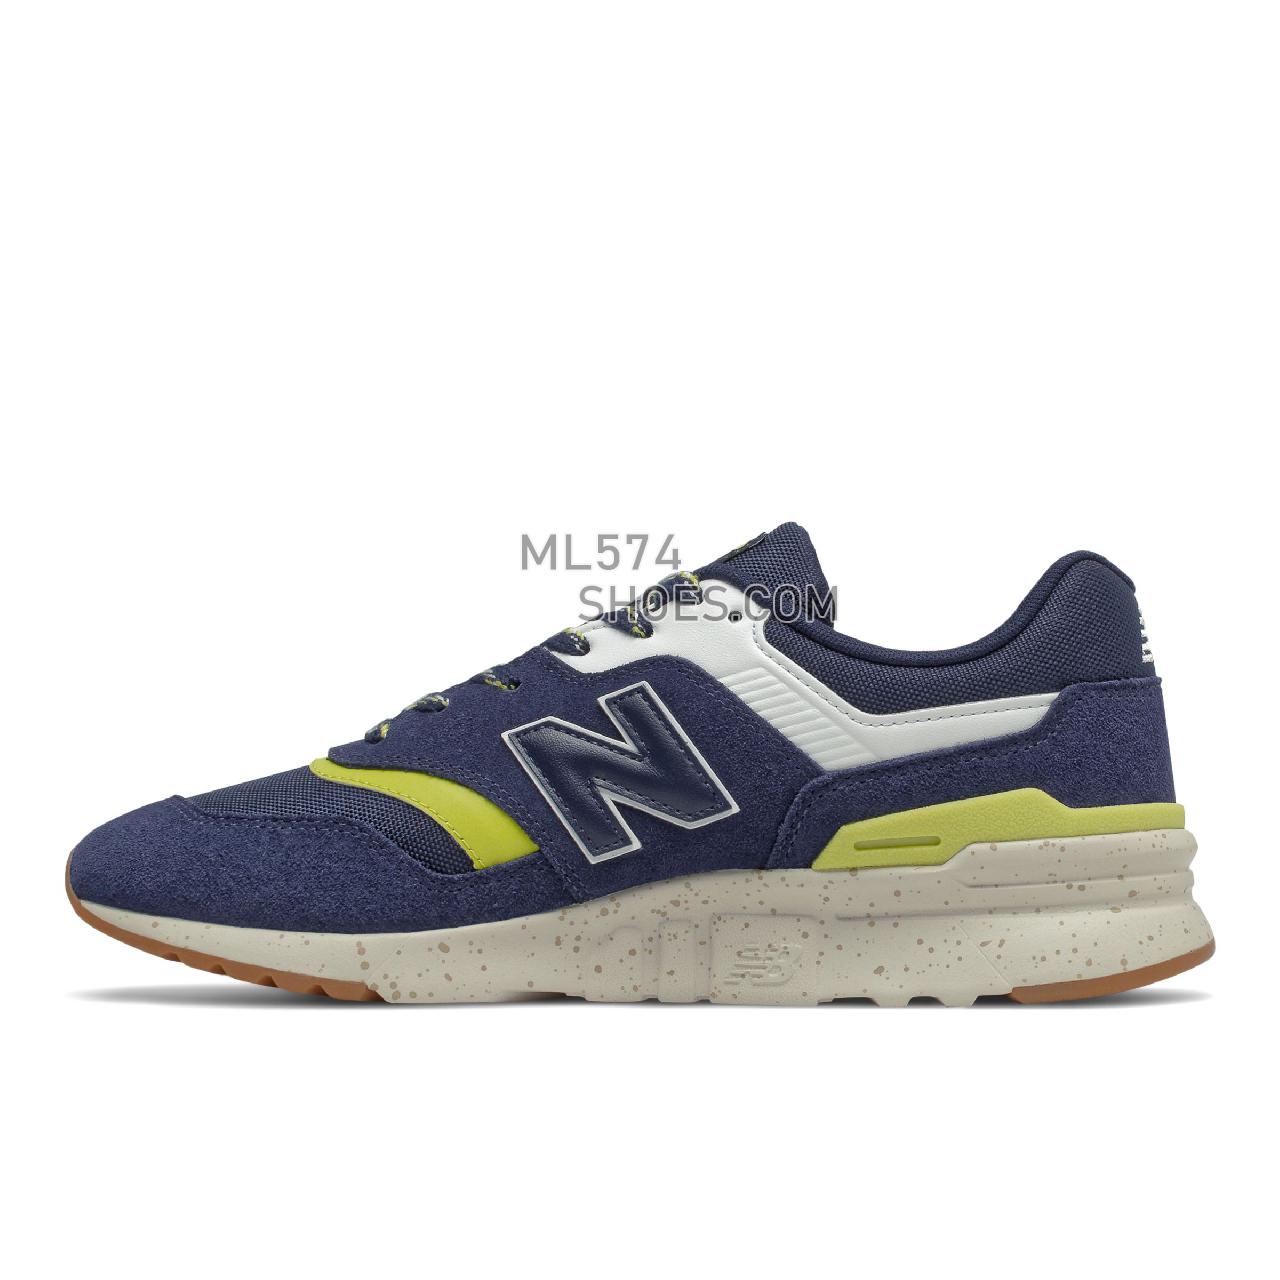 New Balance 997H - Men's Classic Sneakers - Pigment with Sulpher Yellow - CM997HAA